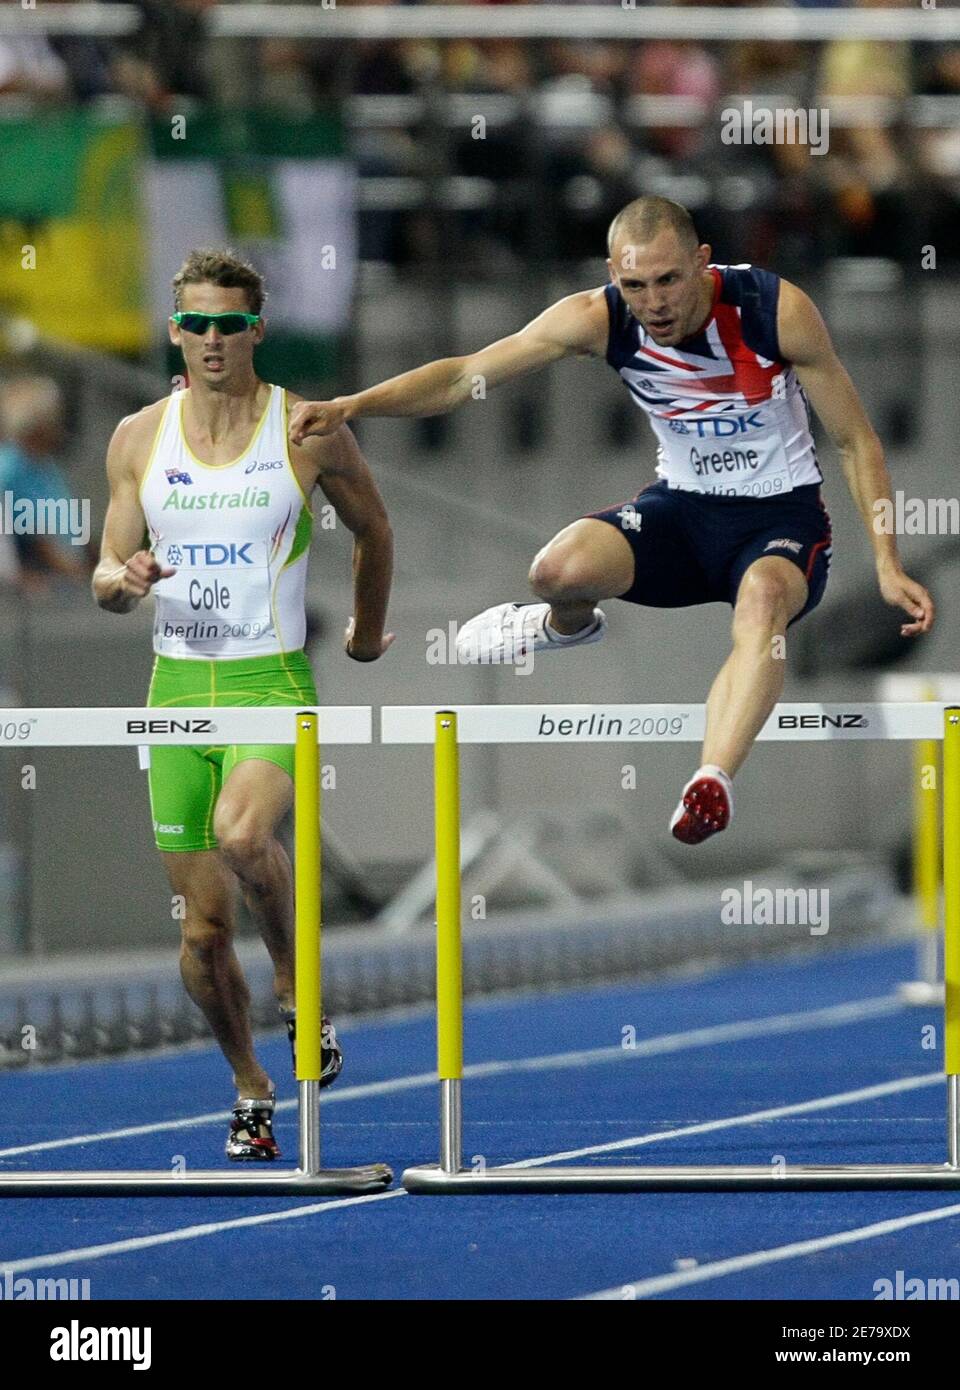 Britain's David Greene (R) and Brendan Cole of Australia compete in the men's fourth heats 400 metres hurdles event during the world athletics championships at the Olympic stadium in Berlin, August 15, 2009.     REUTERS/Michael Dalder (GERMANY) Stock Photo